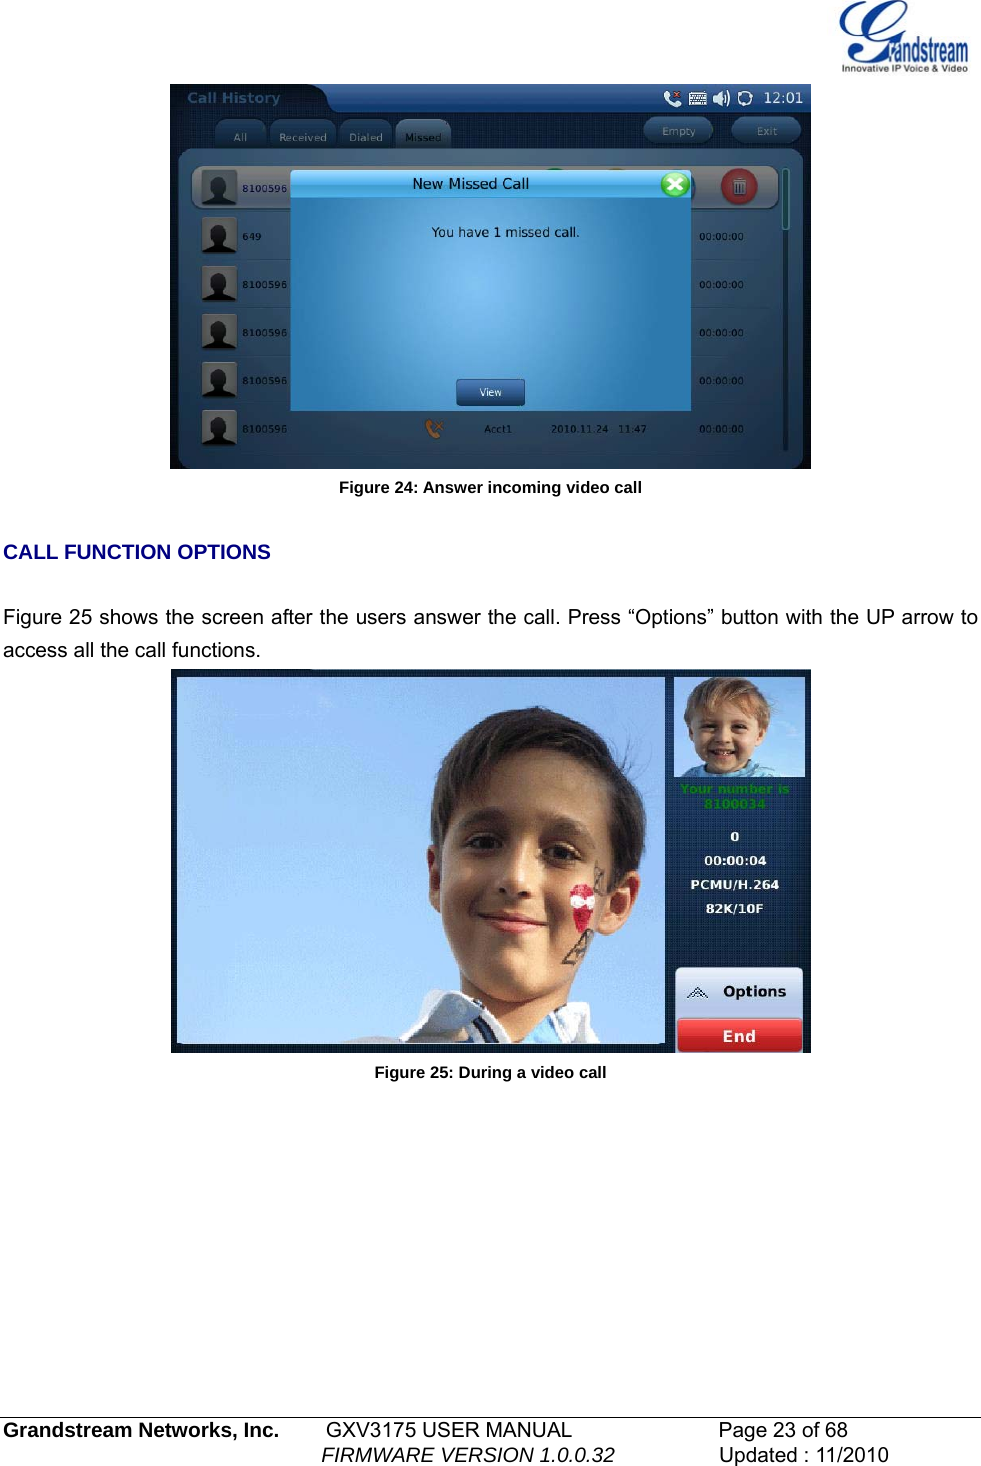    Figure 24: Answer incoming video call  CALL FUNCTION OPTIONS  Figure 25 shows the screen after the users answer the call. Press “Options” button with the UP arrow to access all the call functions.  Figure 25: During a video call    Grandstream Networks, Inc.        GXV3175 USER MANUAL                      Page 23 of 68                                                        FIRMWARE VERSION 1.0.0.32                  Updated : 11/2010  